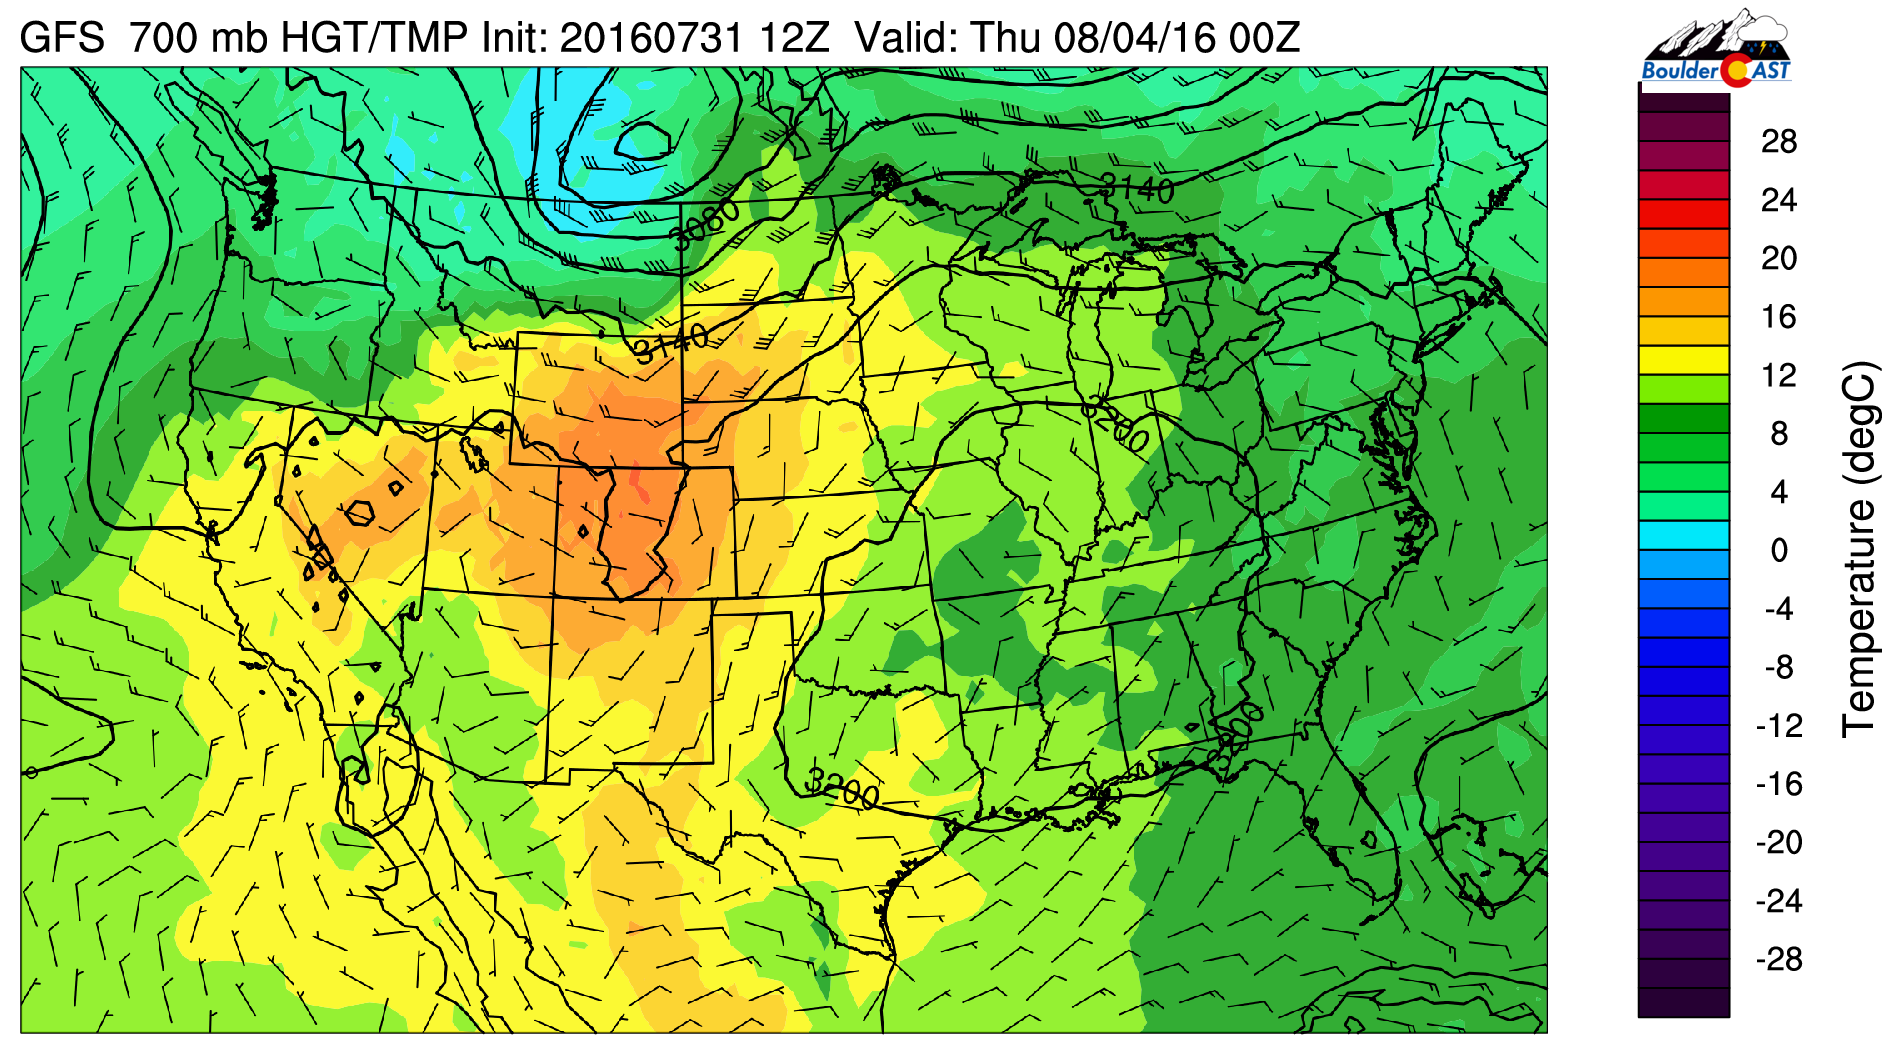 GFS 700 mb temperature for Wednesday